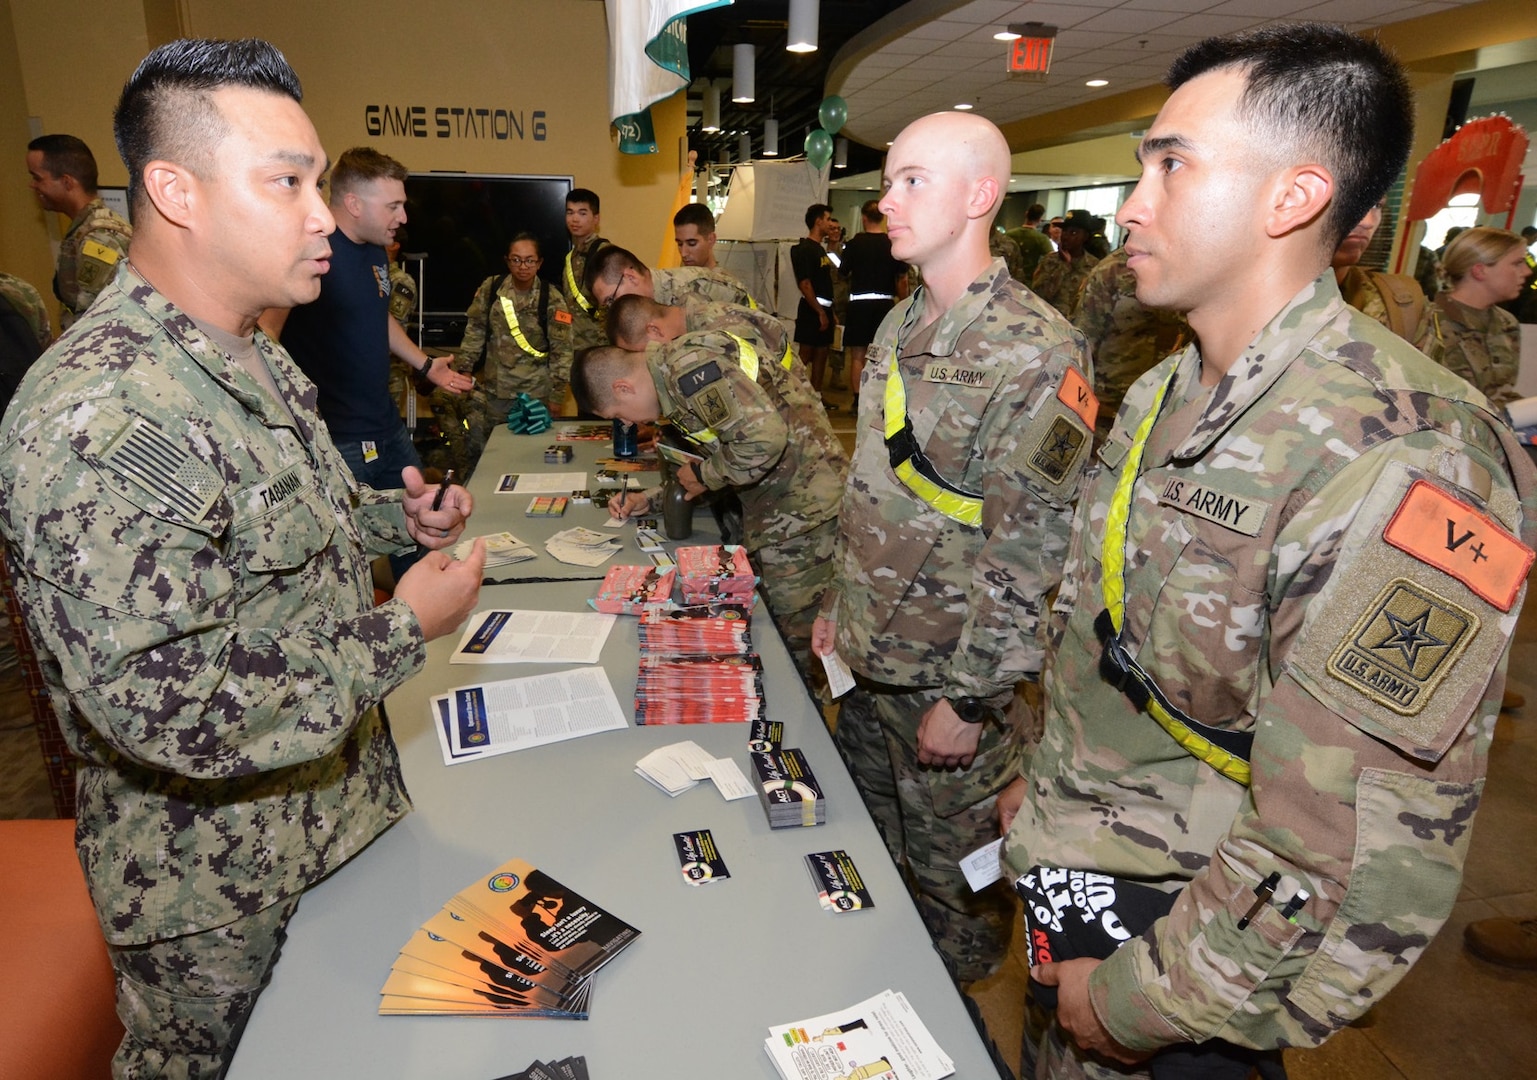 Soldiers stop by the Navy Ask, Care, and Treatment, or ACT, booth. The ACT program is a three-step process designed to help determine if someone is suicidal and to prevent them from hurting themselves.